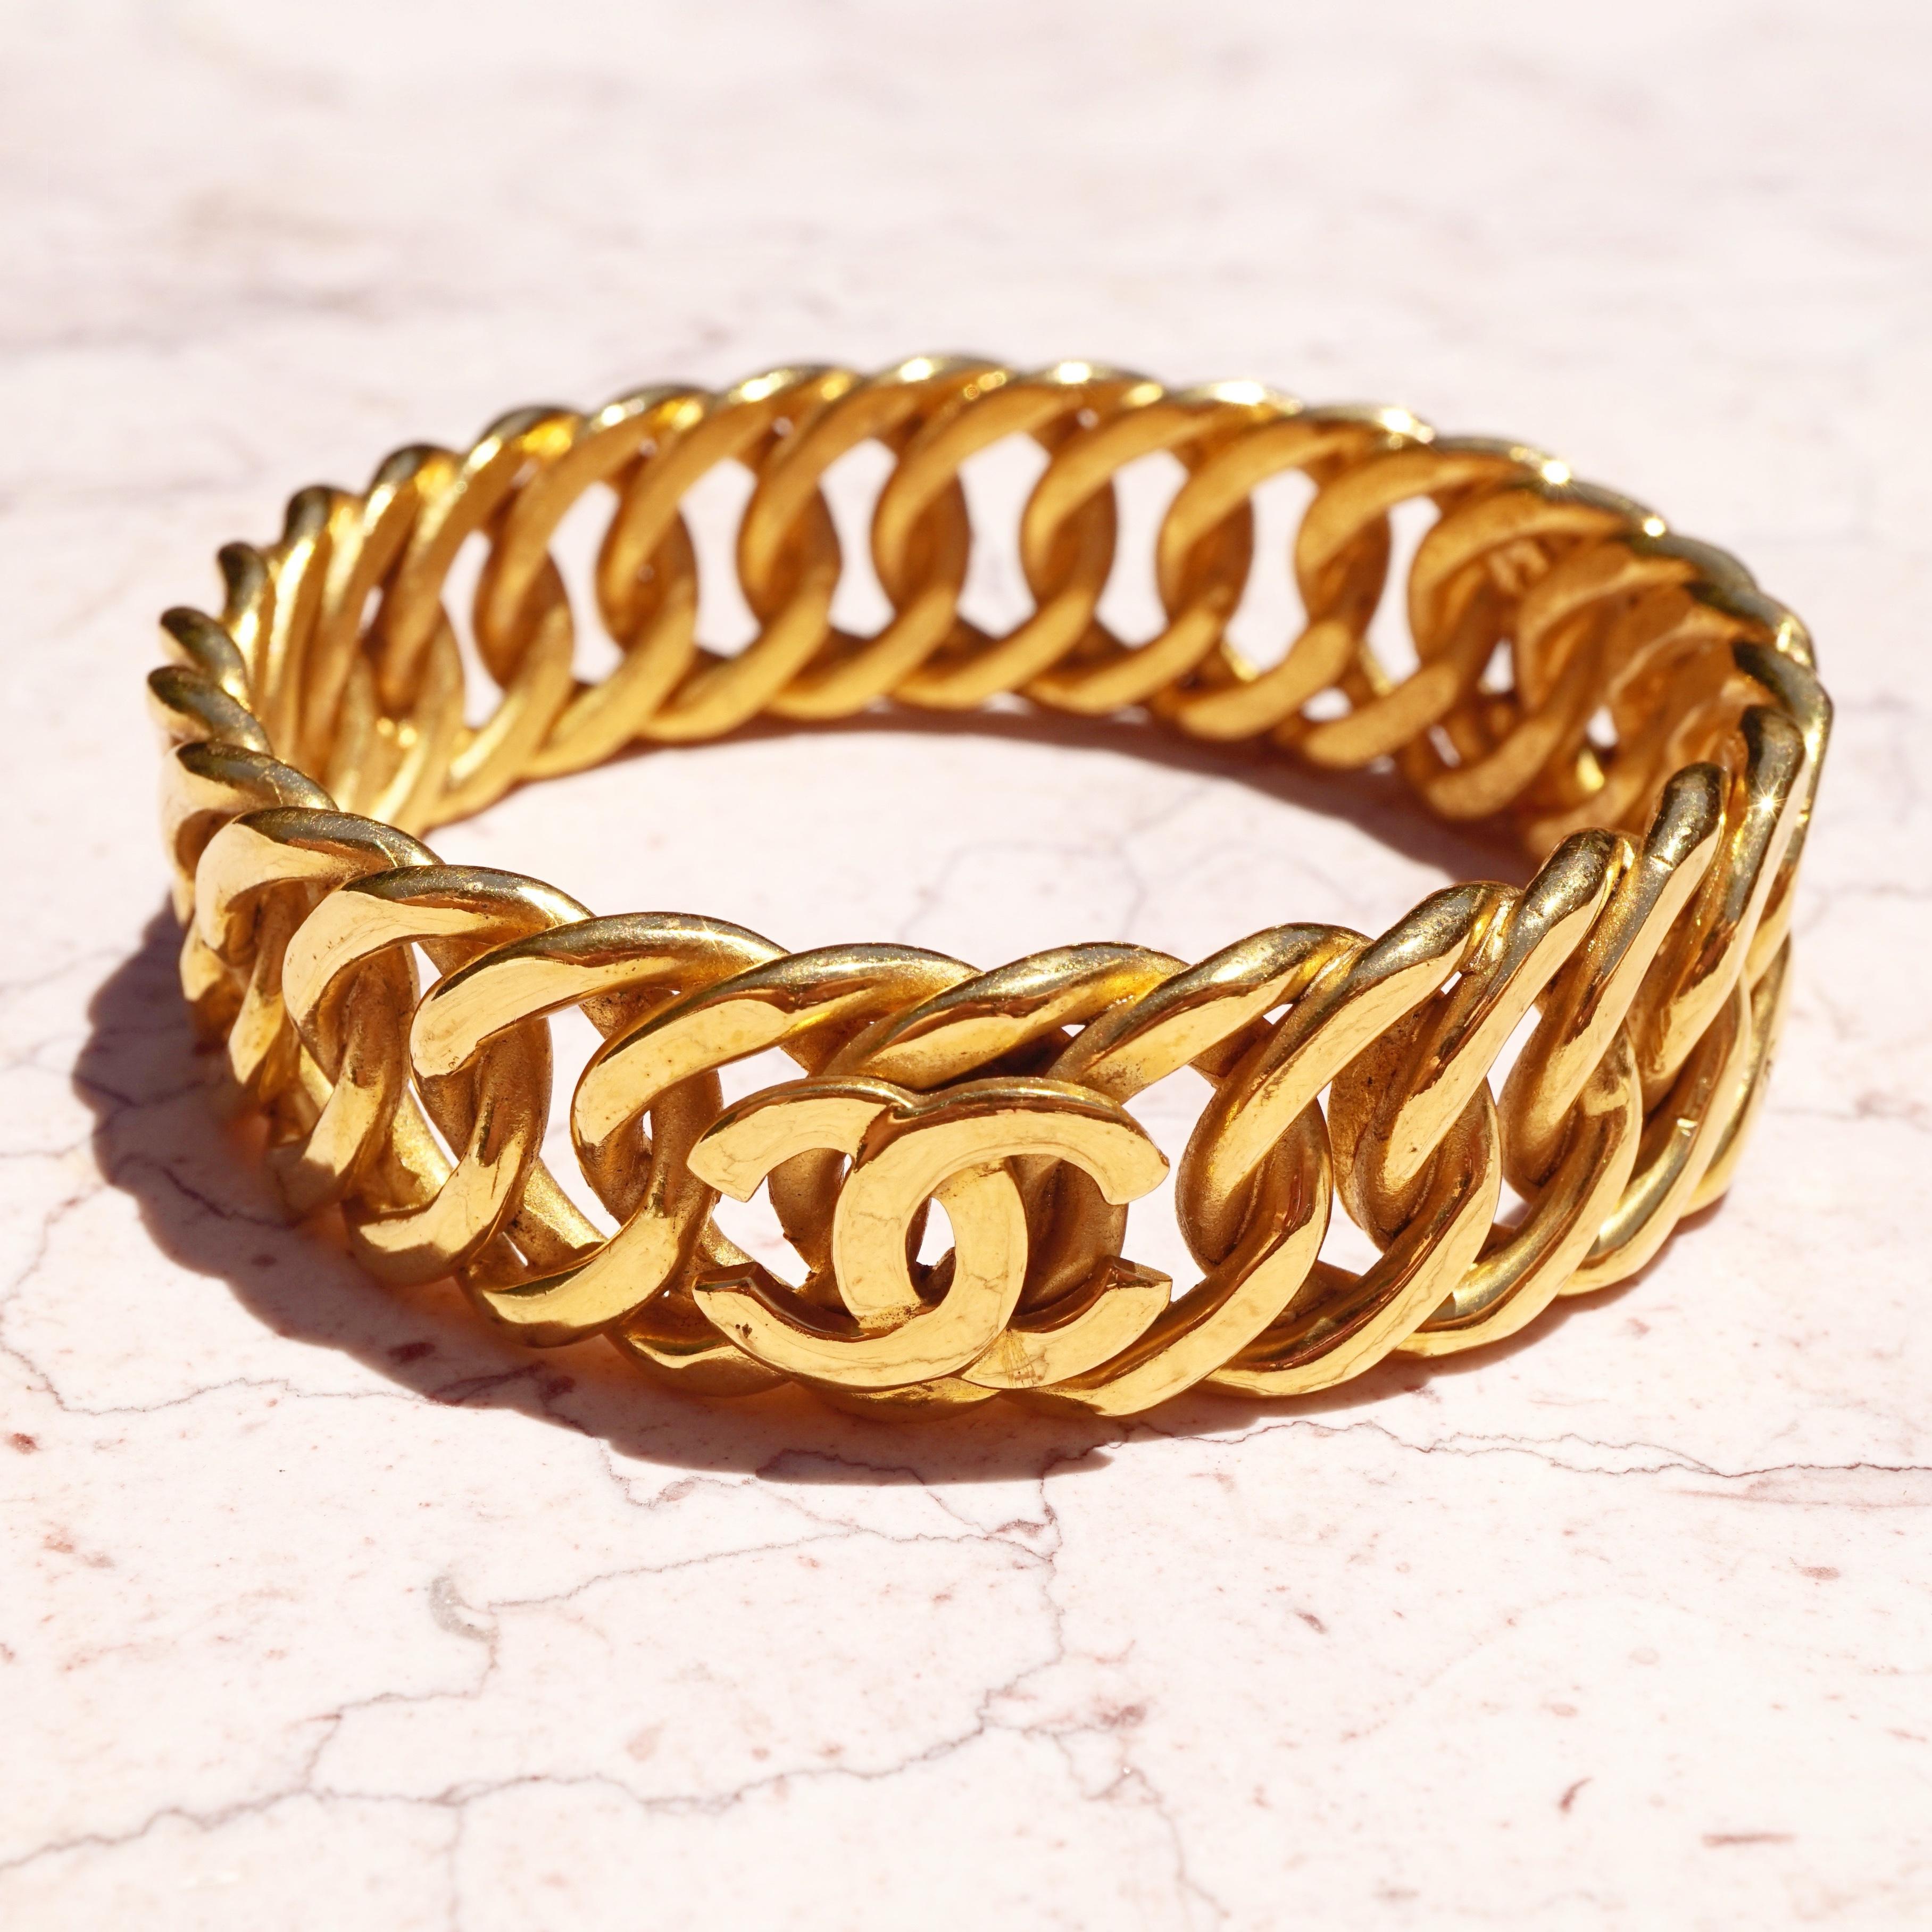 Vintage, signed Chanel heavy gilt curb chain bangle bracelet decorated with three Chanel 